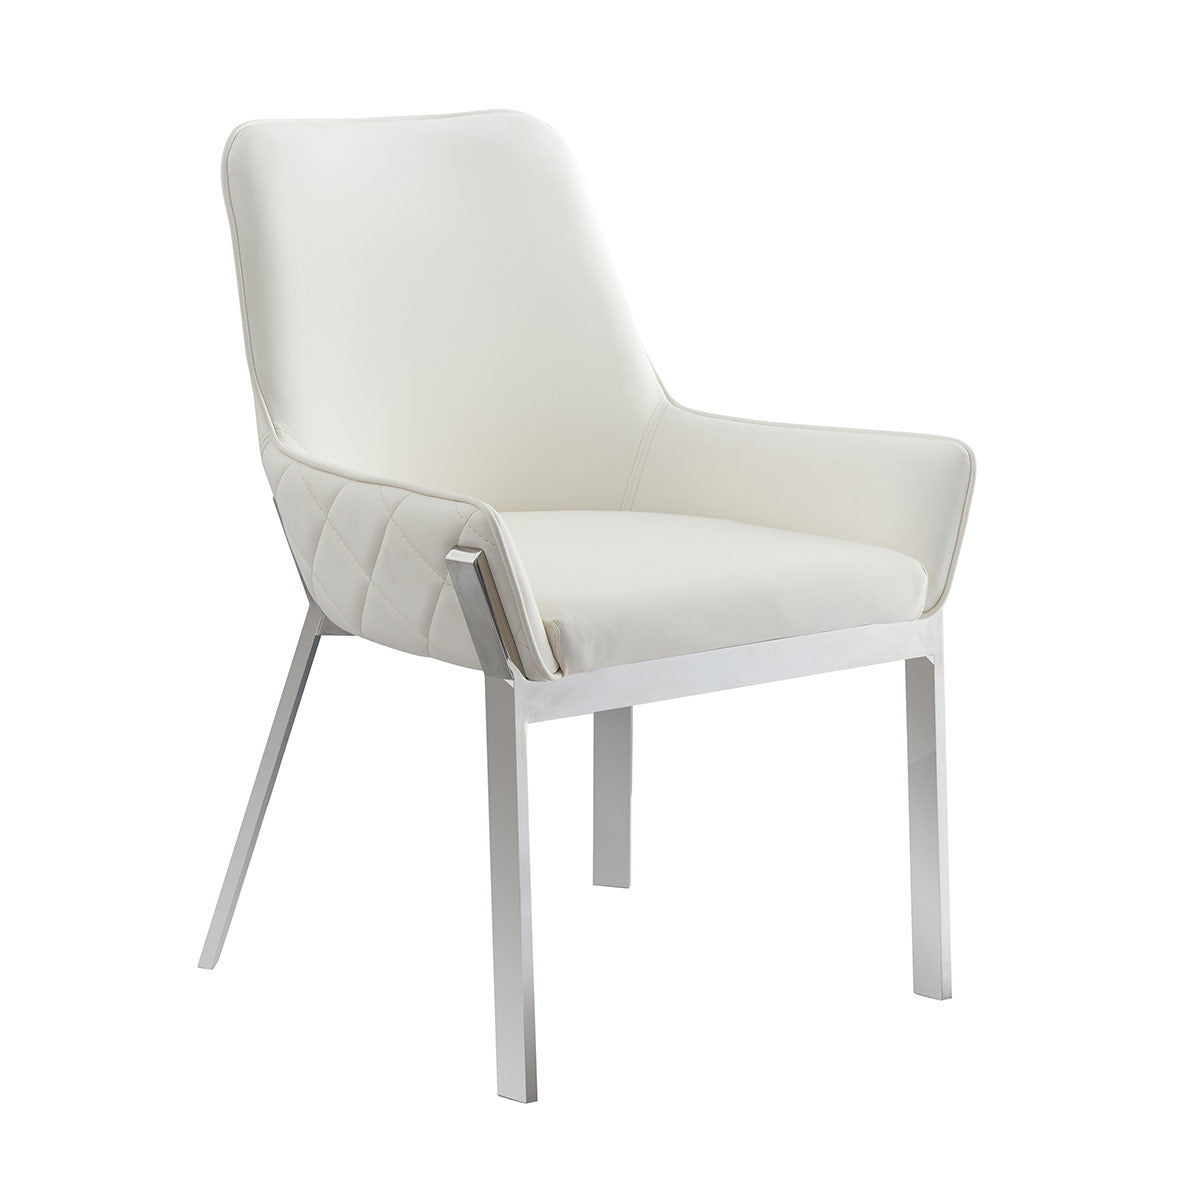 Miami Dining Chair in White | J&M Furniture